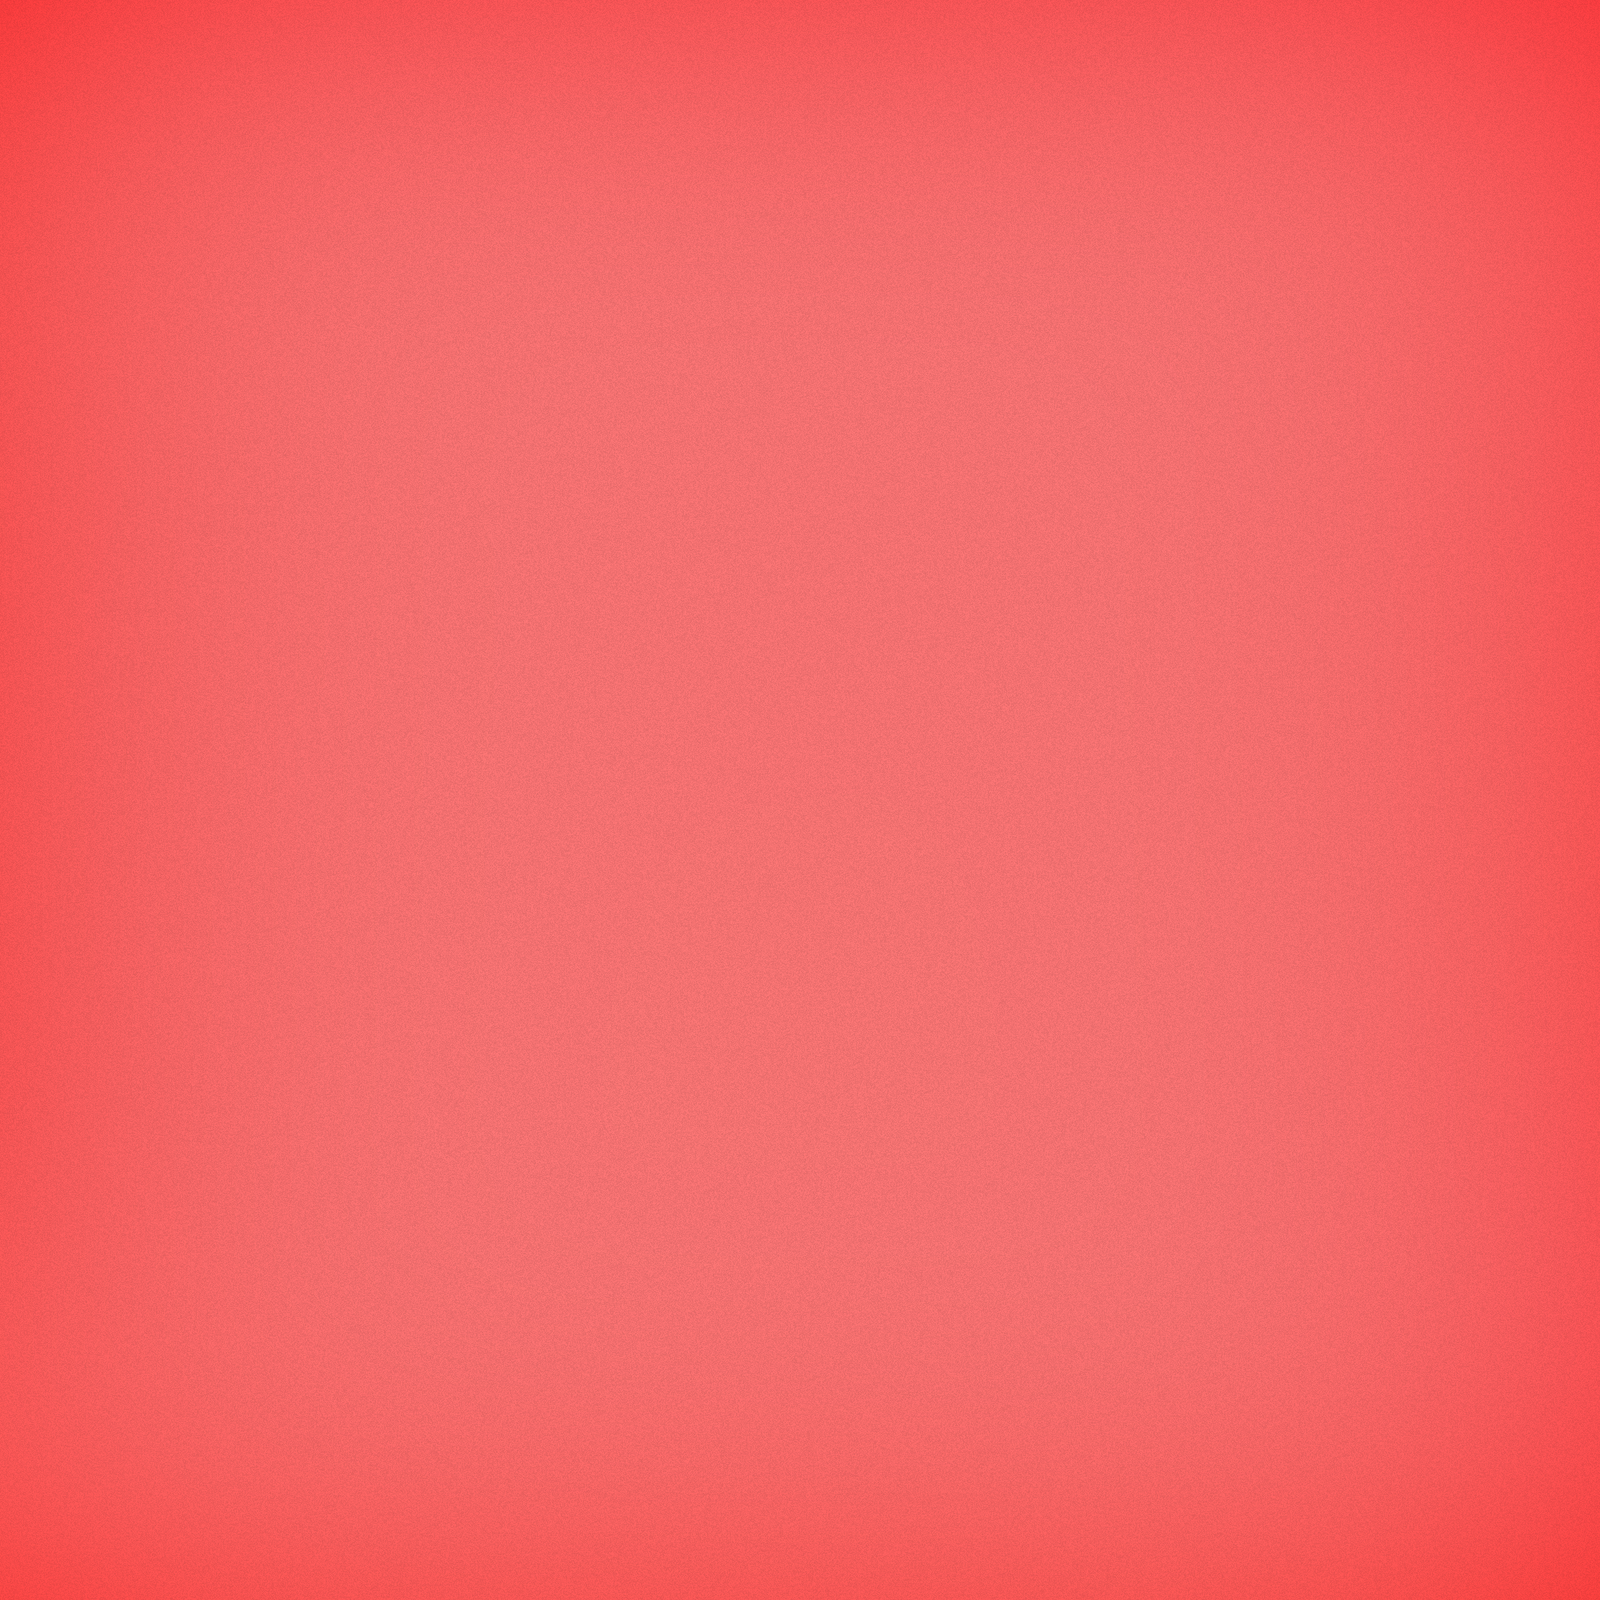 Light Red  Background